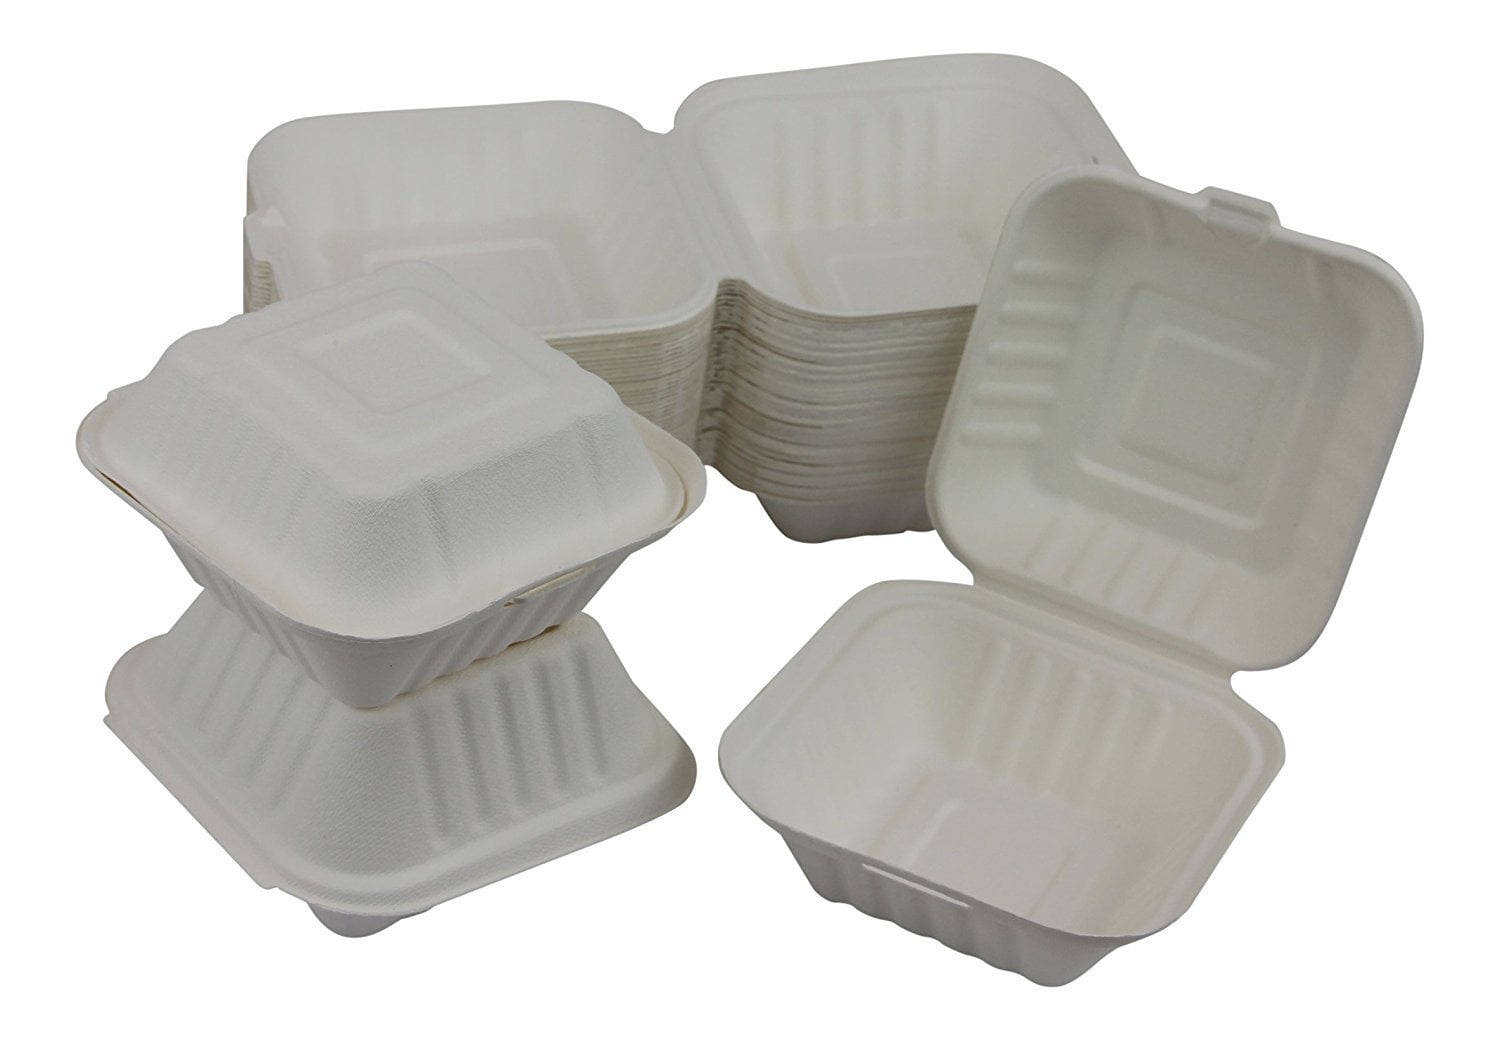 Buy Houseables Takeout Containers, to Go Box, Restaurant Take Out